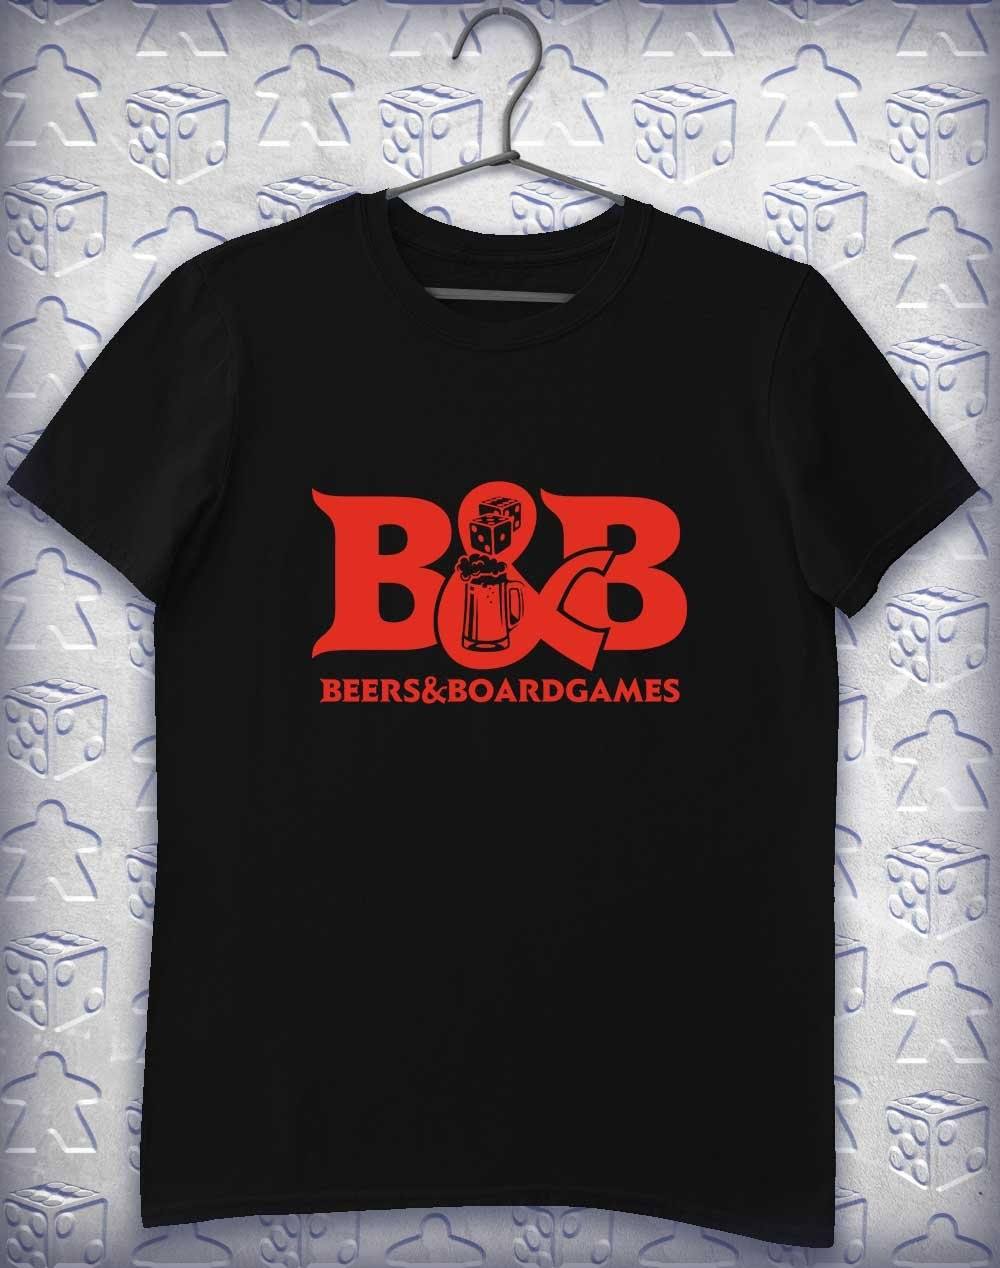 B&B Beers and Boardgames T-Shirt S / Black  - Off World Tees